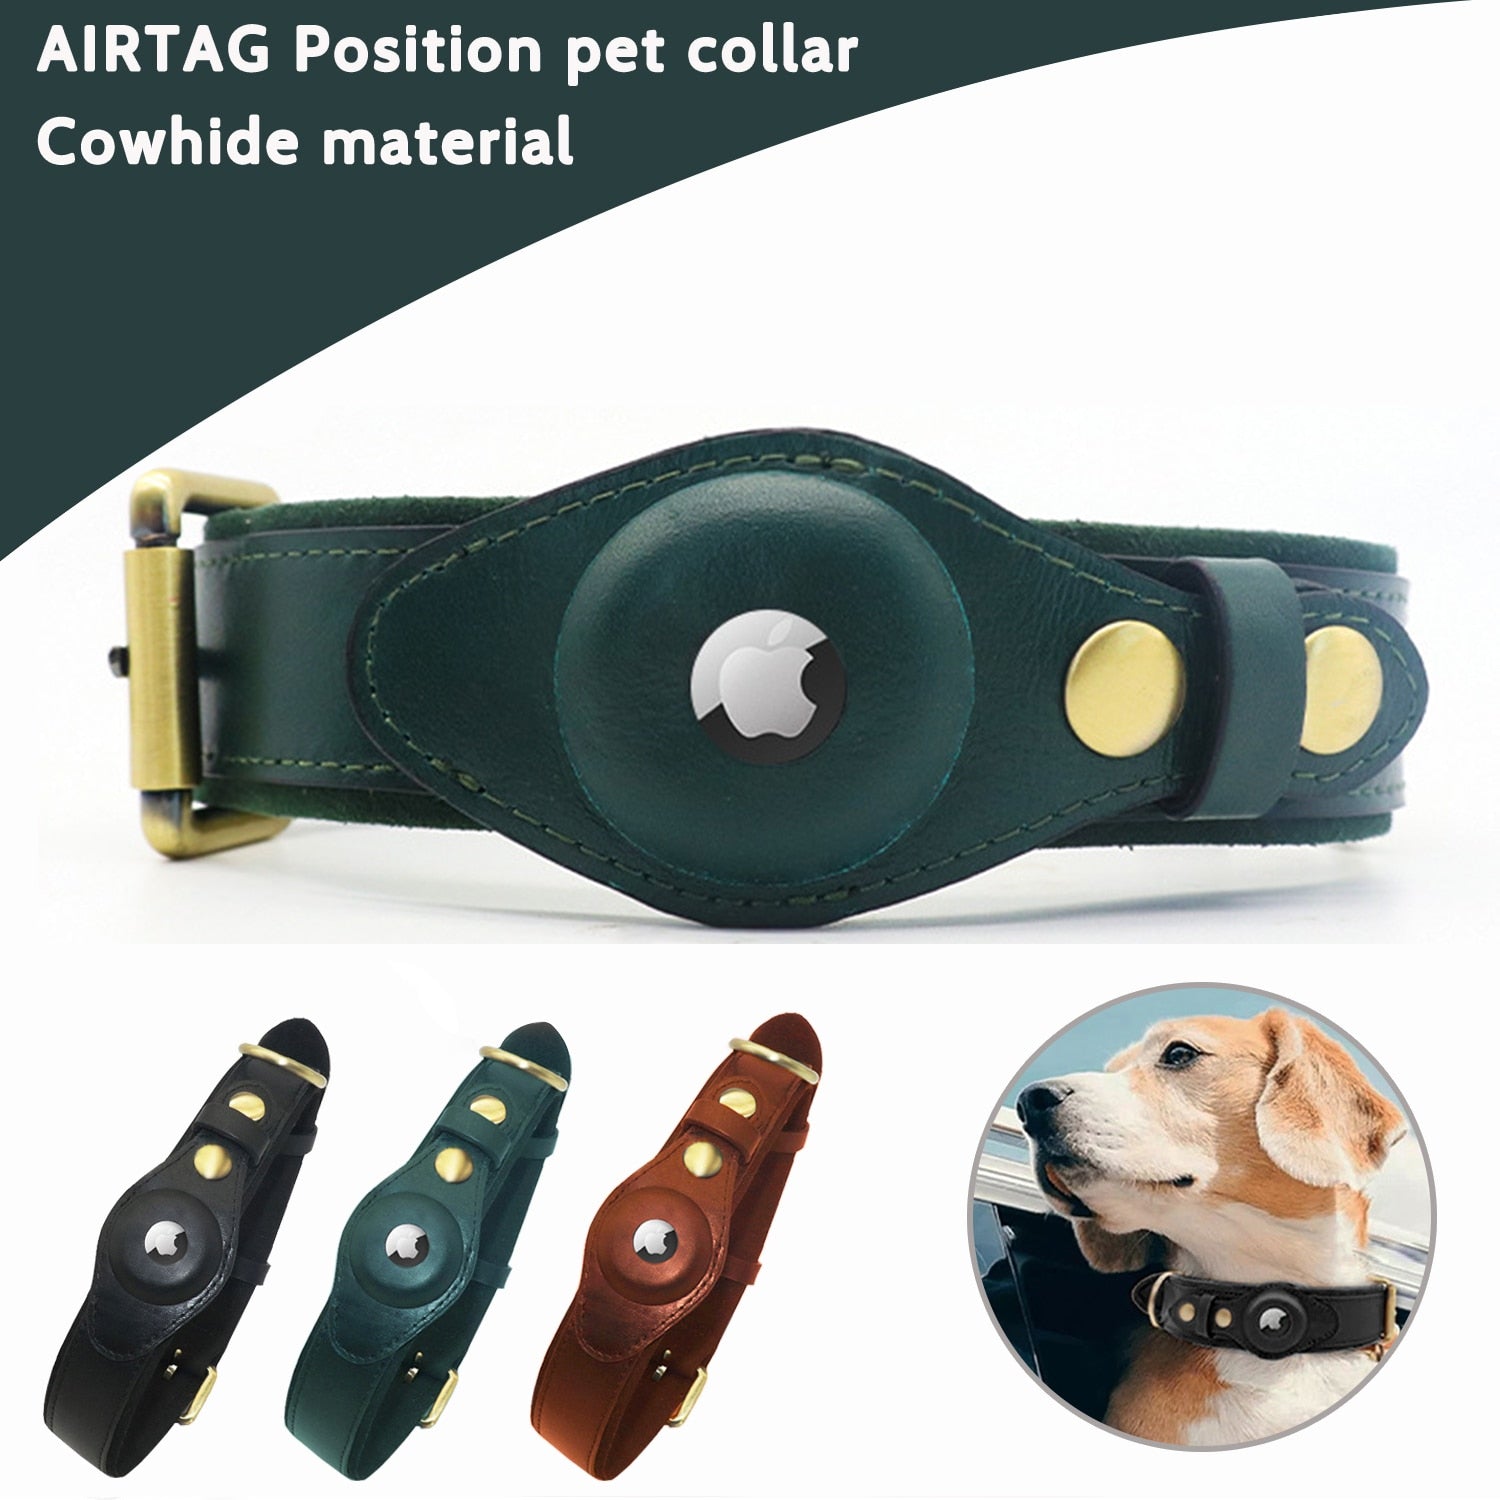 Genuine Leather Airtag Dog Collar with Apple Airtag Holder Case Pet GPS Location Tracker